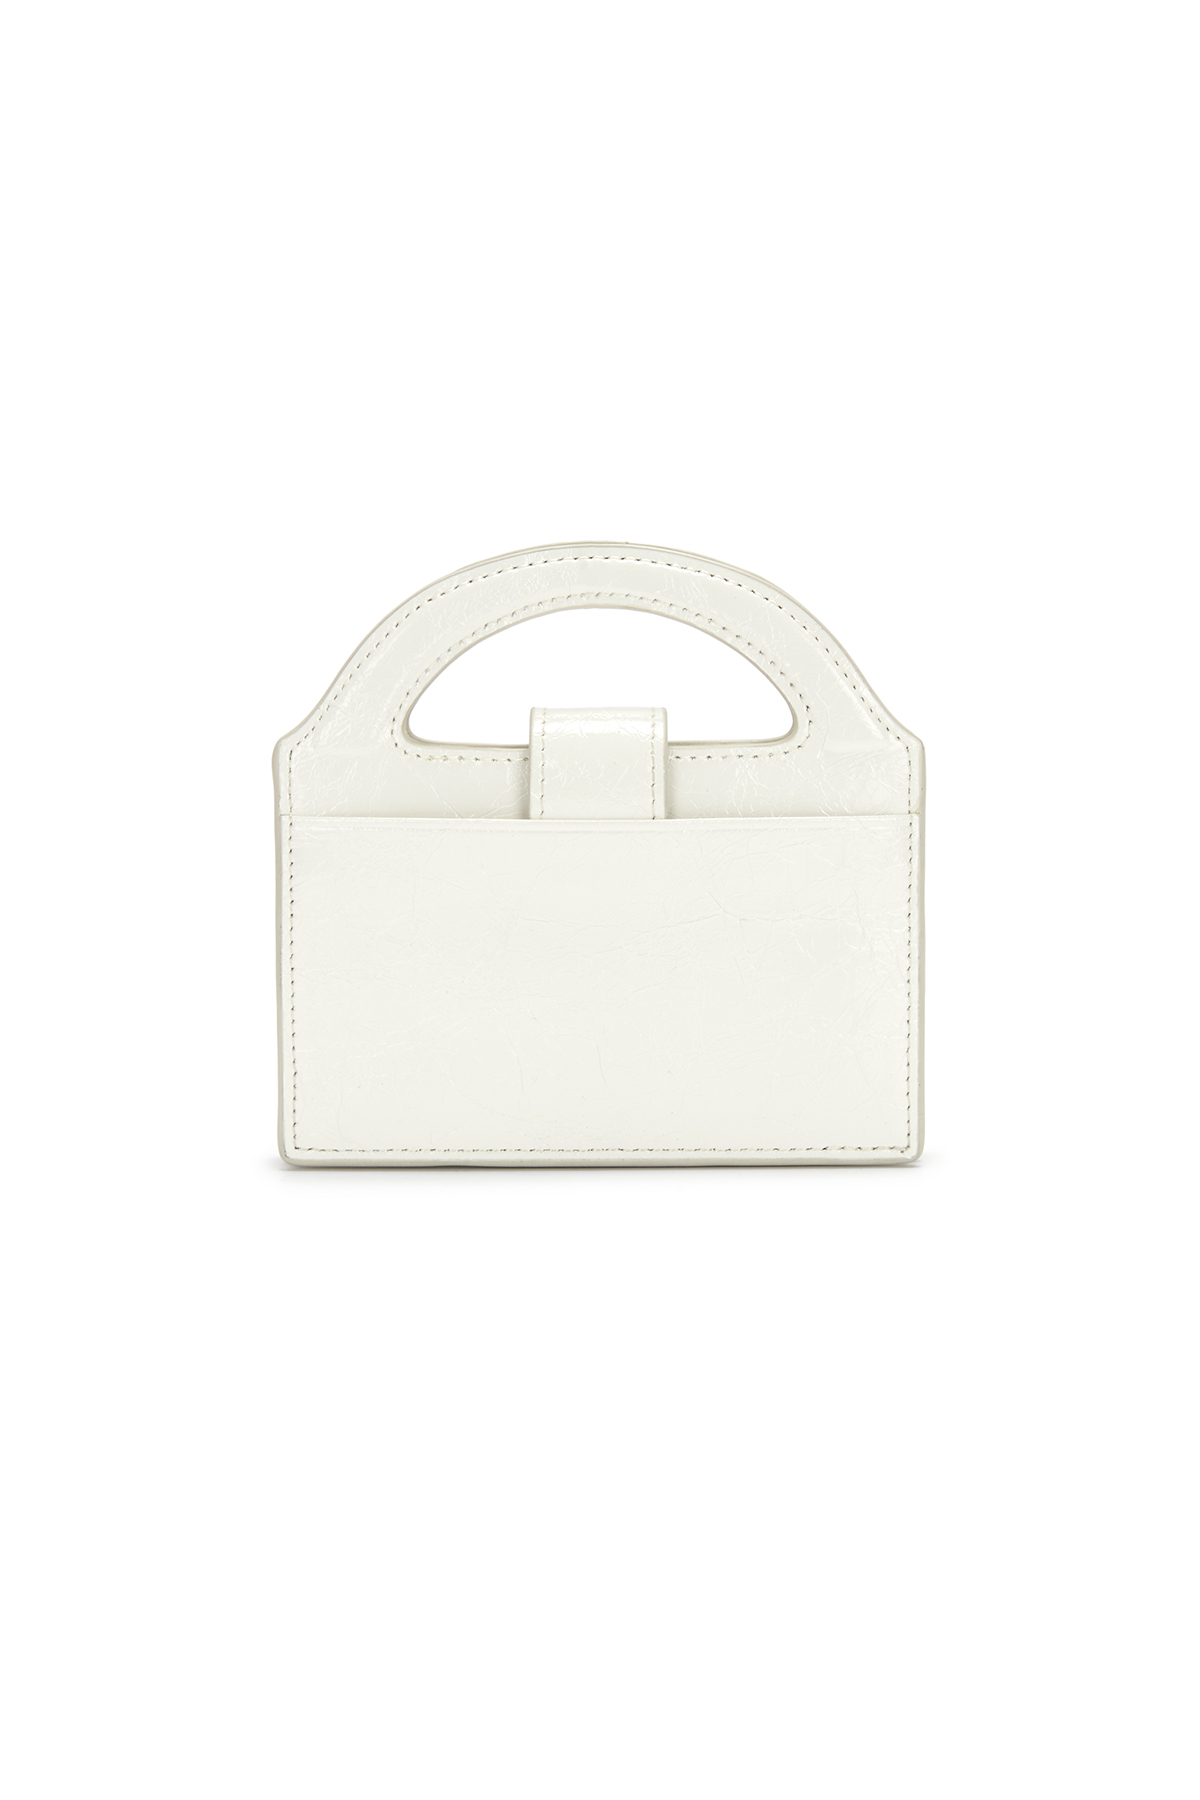 HANDLE ACCORDION CHAIN WALLET IN IVORY